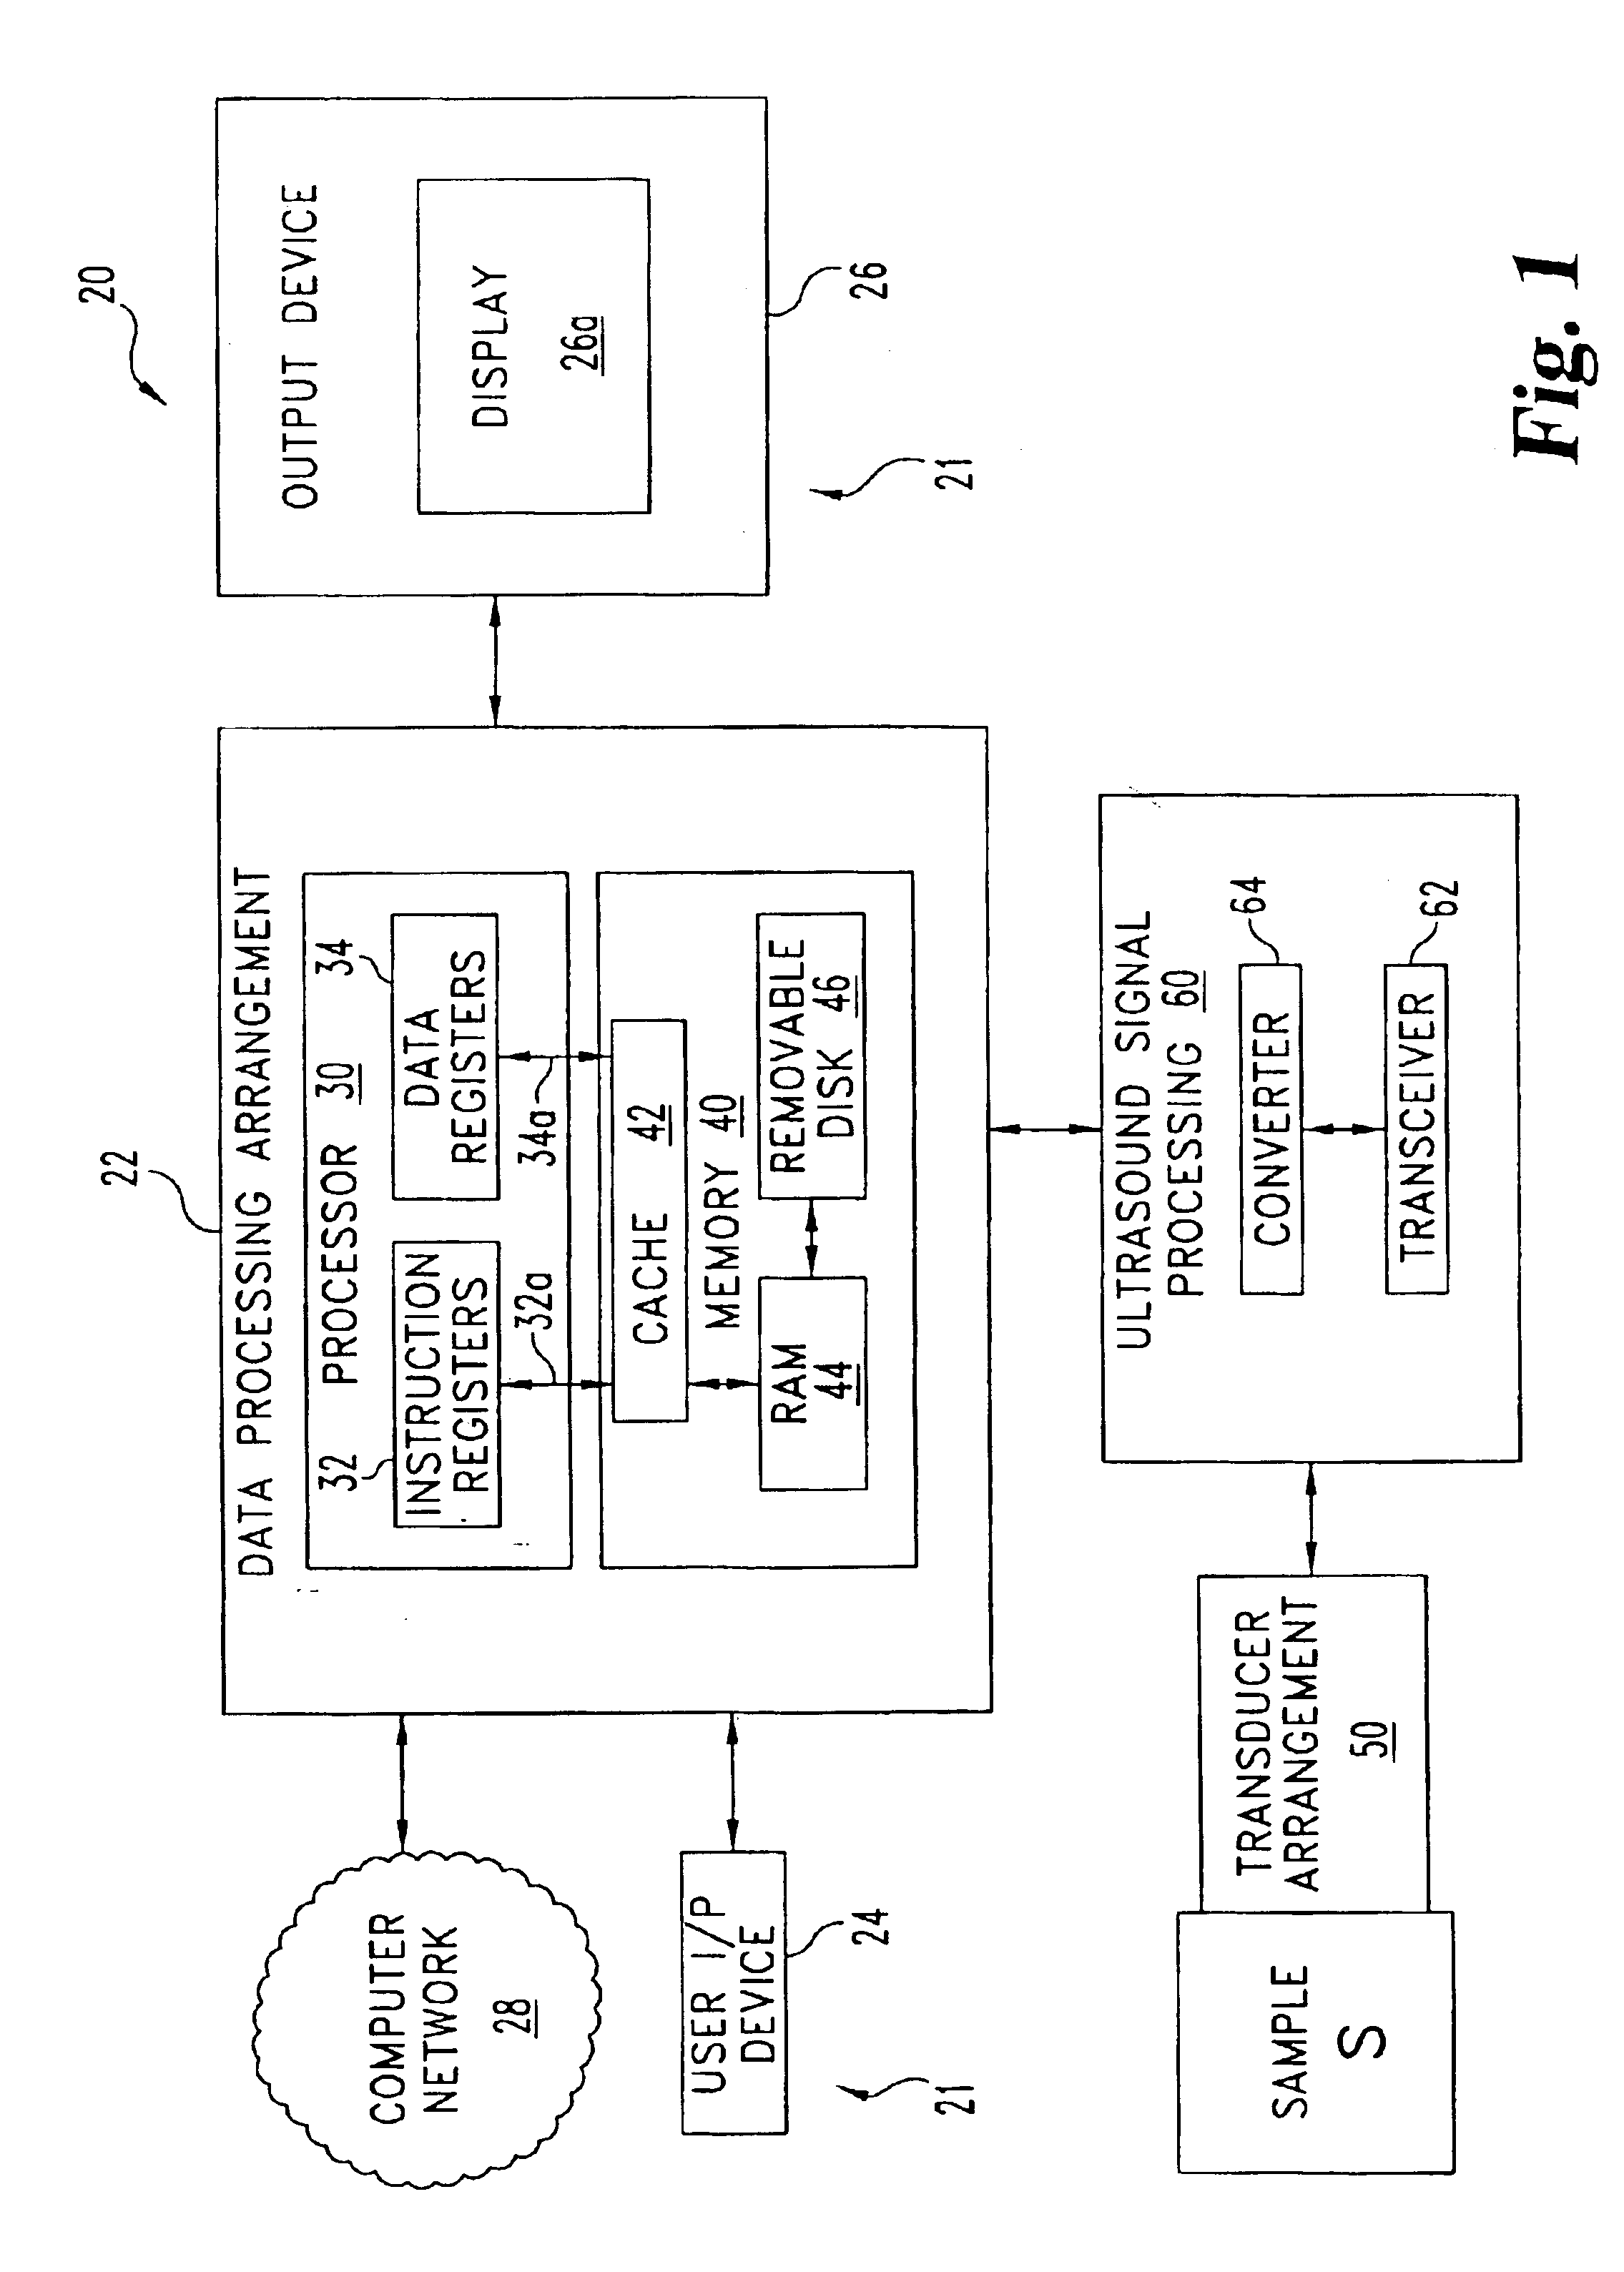 Apparatus, systems, and methods for ultrasound synthetic aperature focusing